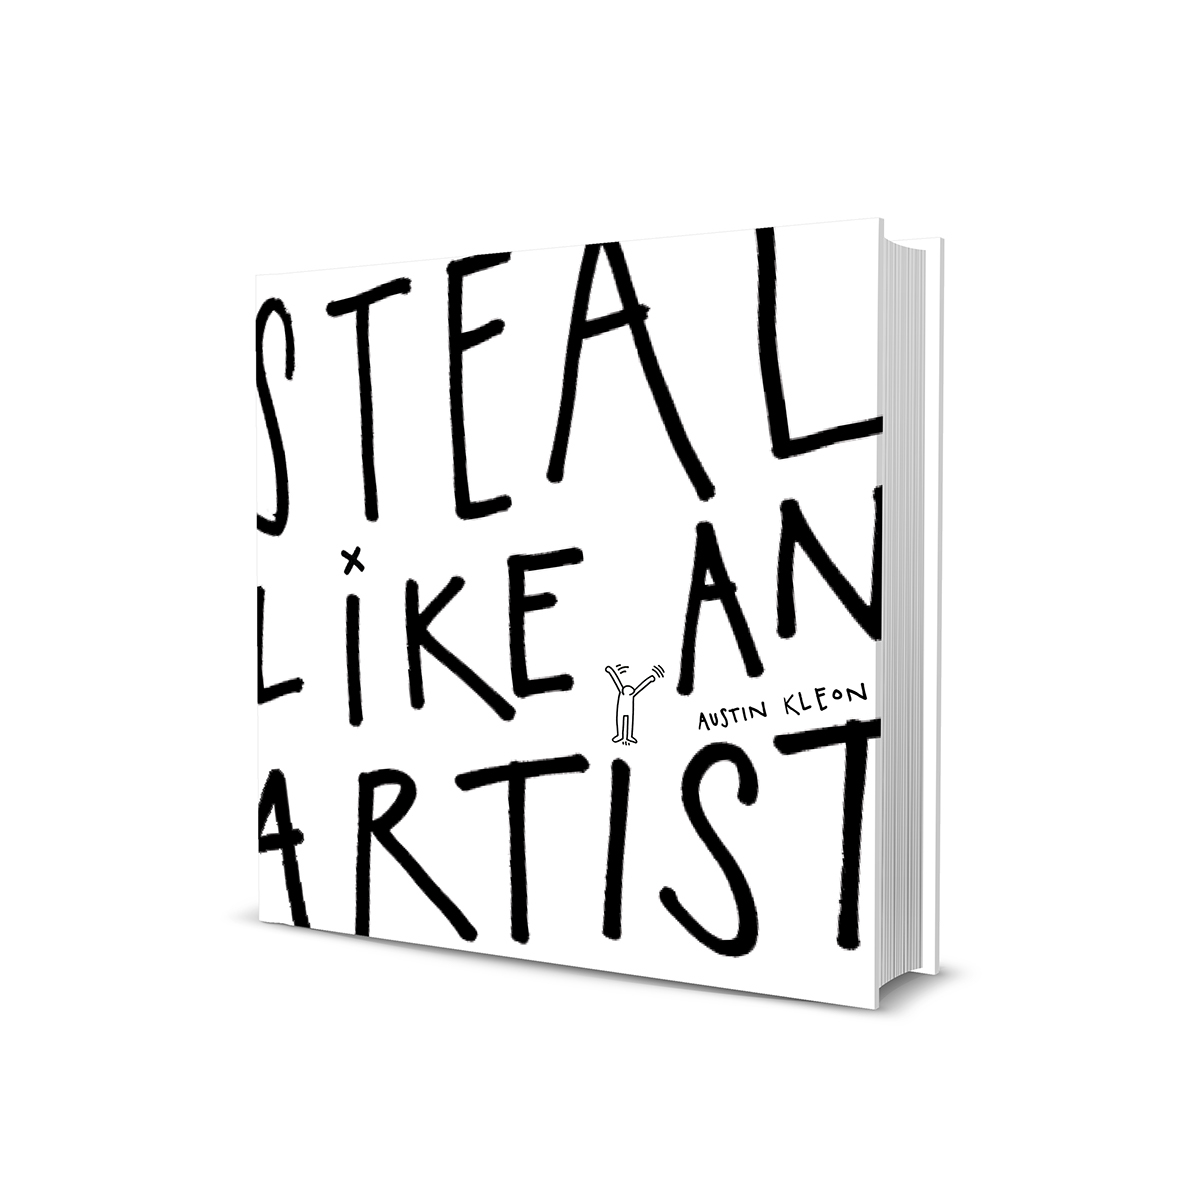 book contemporary austin kleon black and white Keith Haring Steal artist Booklet Reading New York